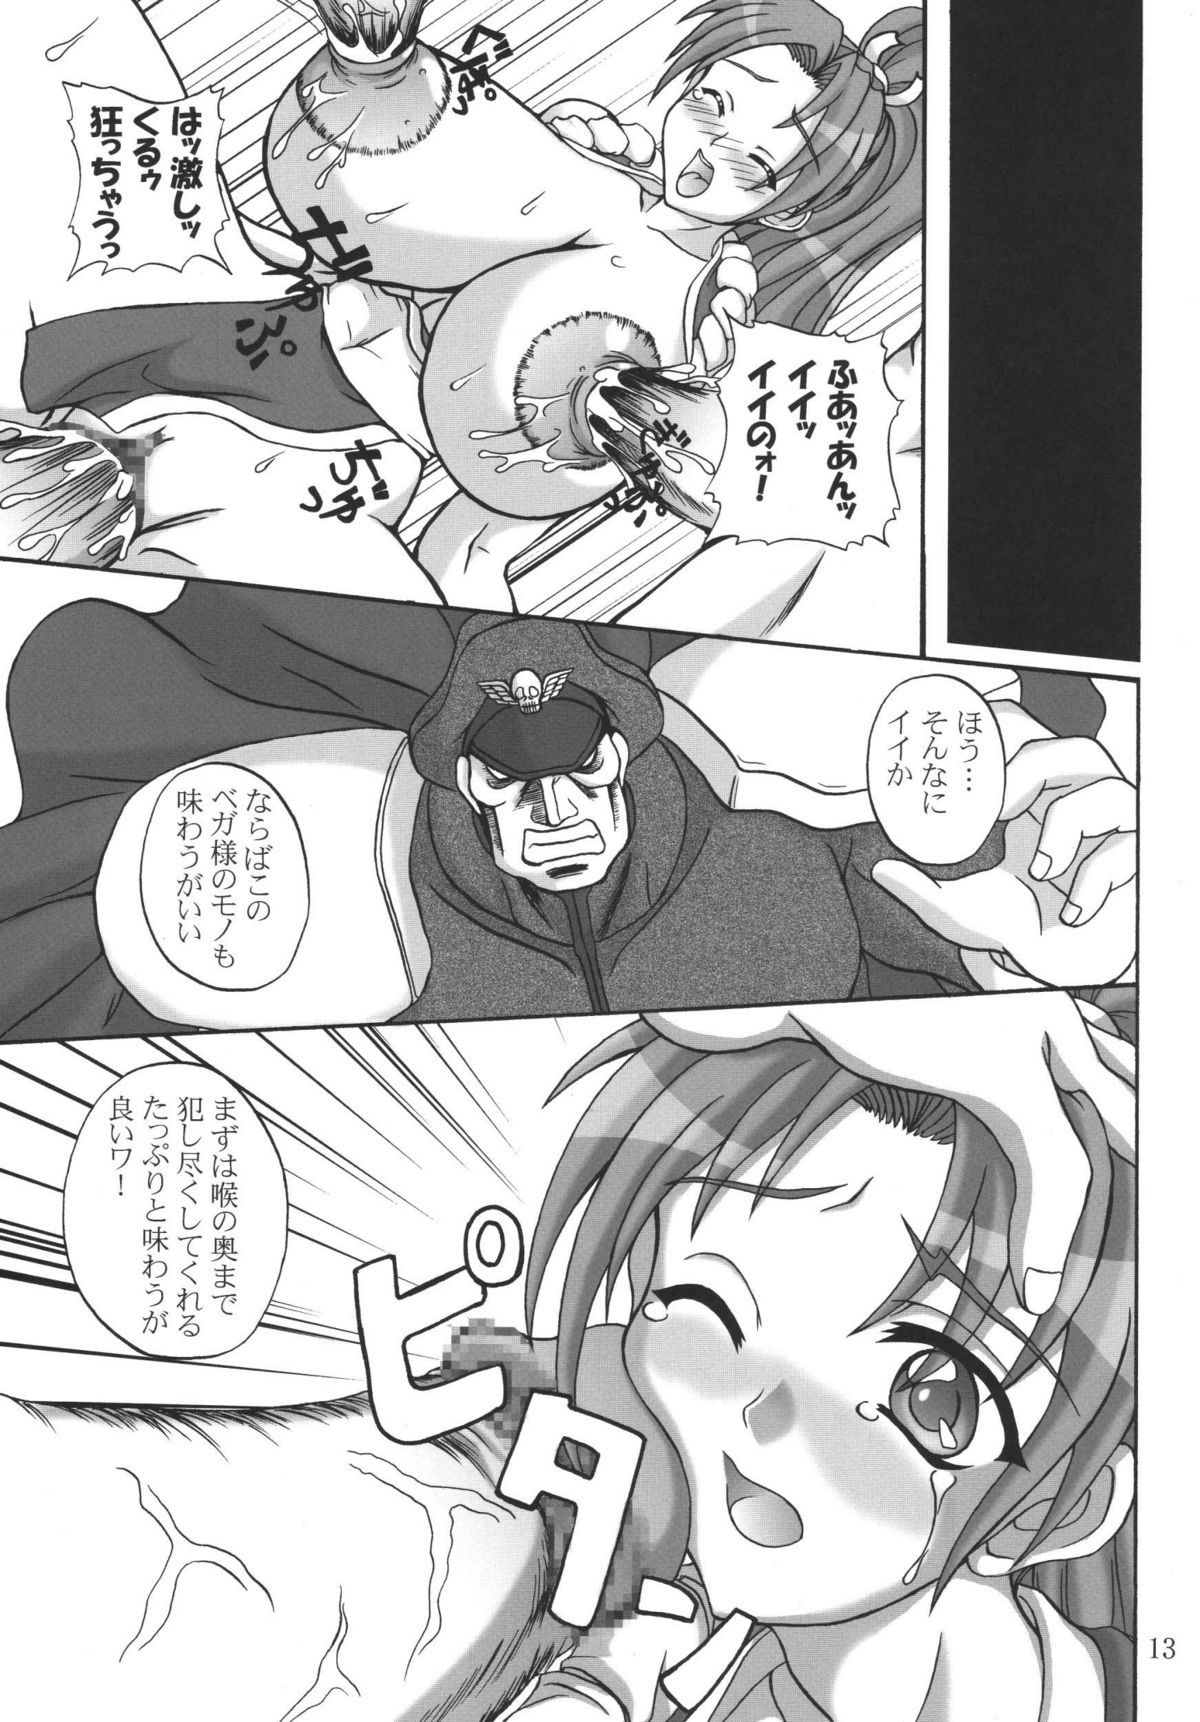 (C63) [Anglachel (Yamamura Natsuru)] Insanity (King of Fighters, Street Fighter) [2nd Edition 2004-12] page 12 full